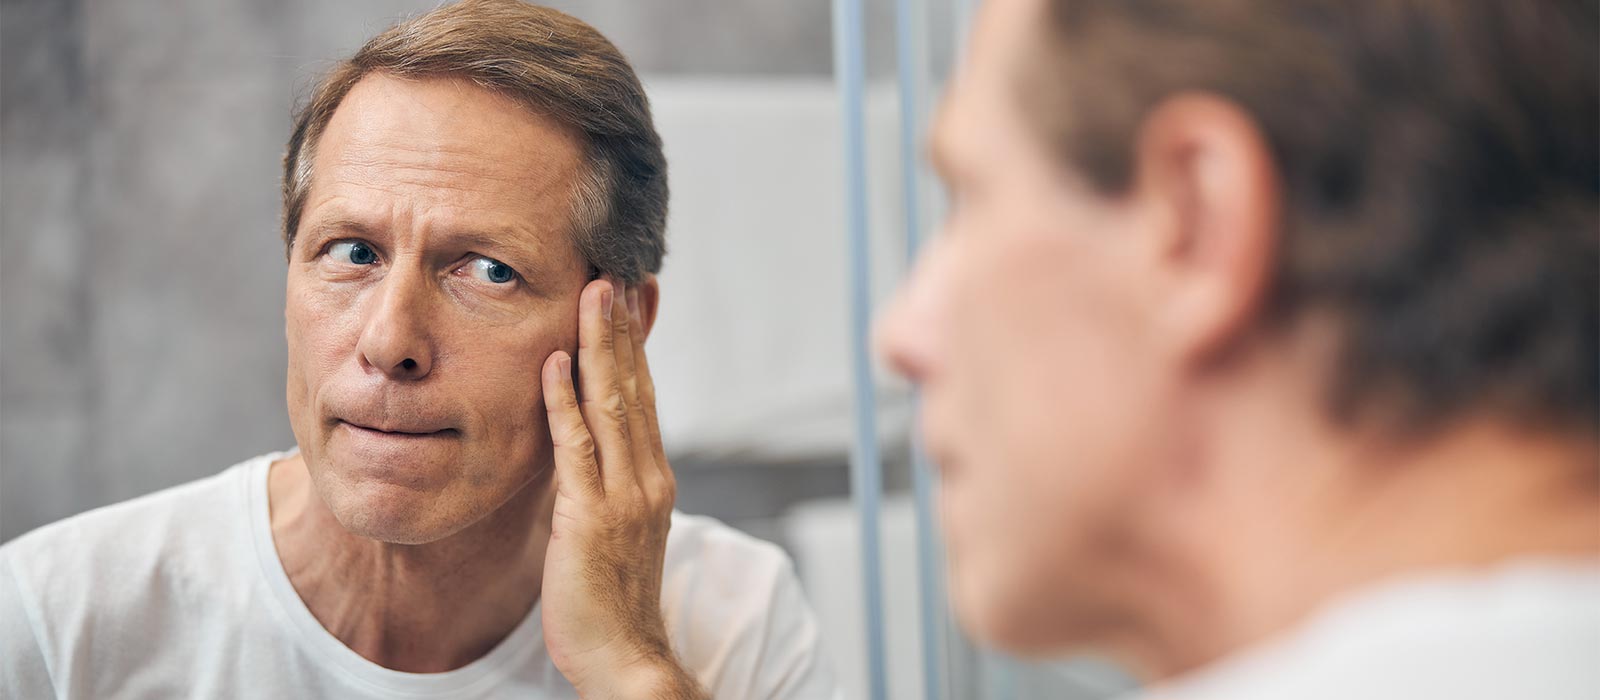 Middle aged man examining his face on mirror.